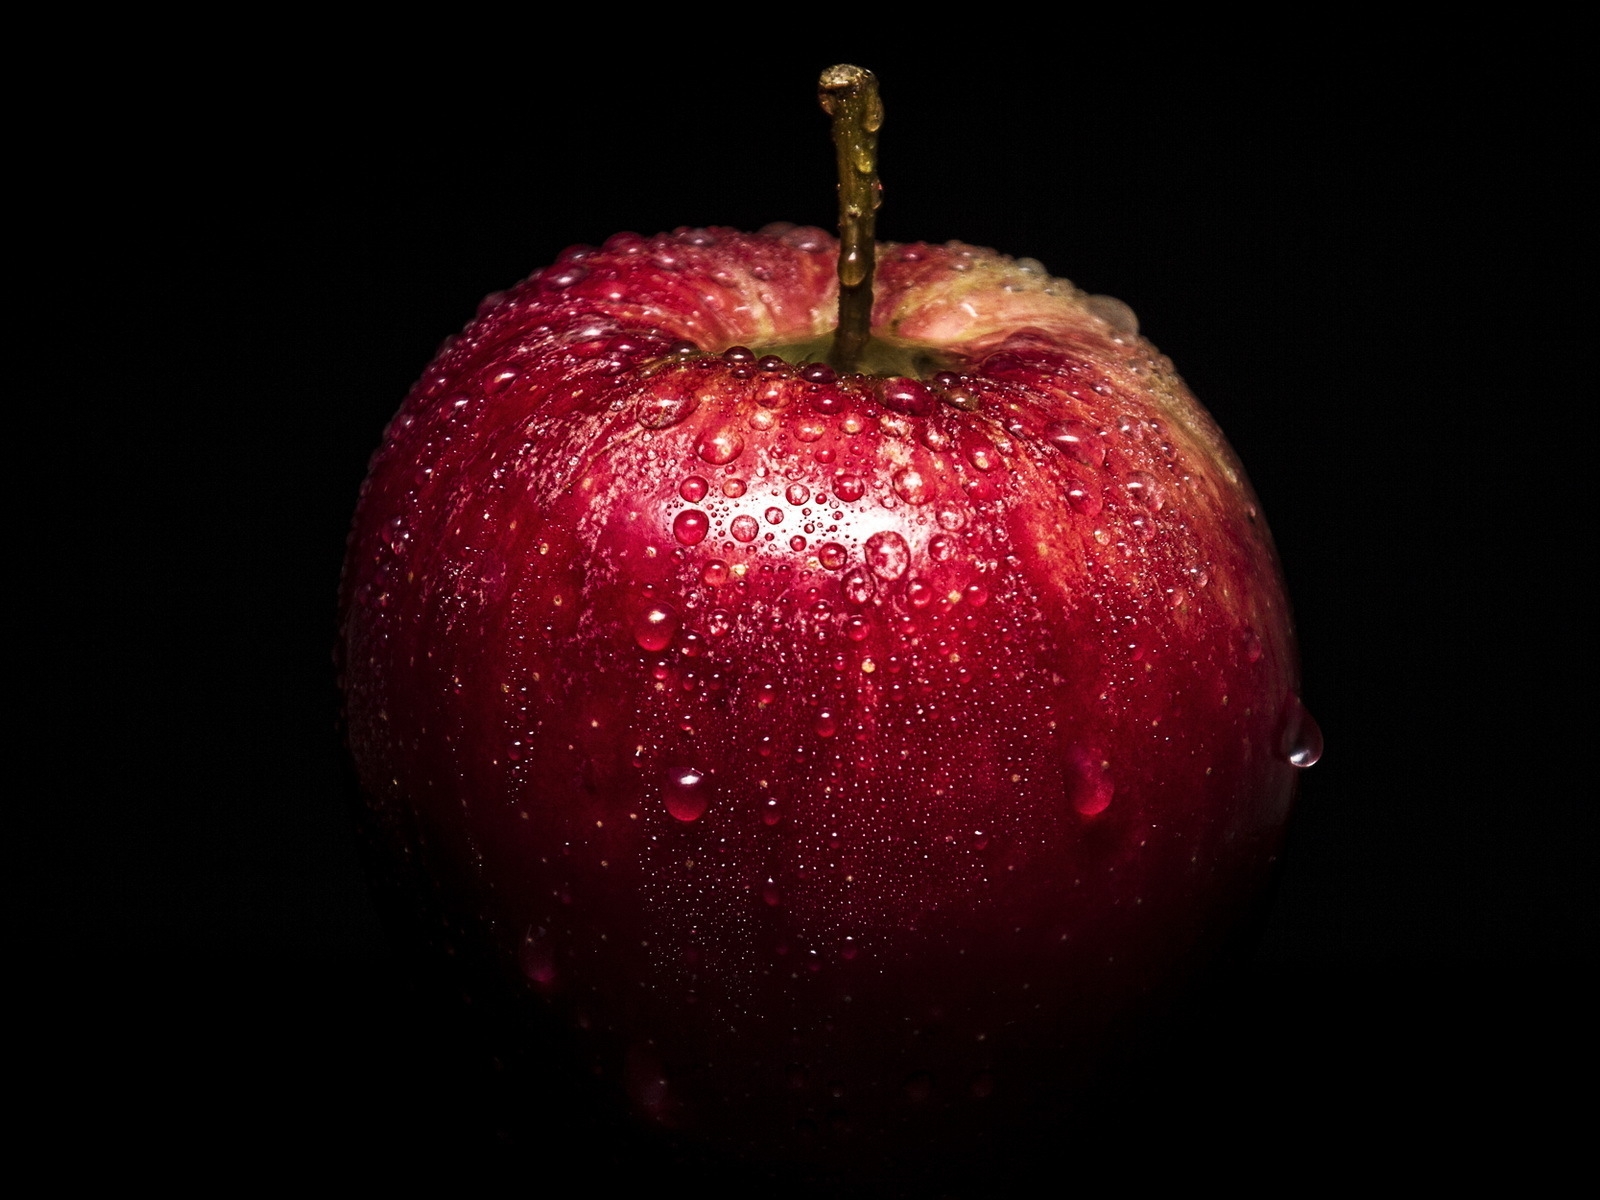 Red Delicious Apple for 1600 x 1200 resolution